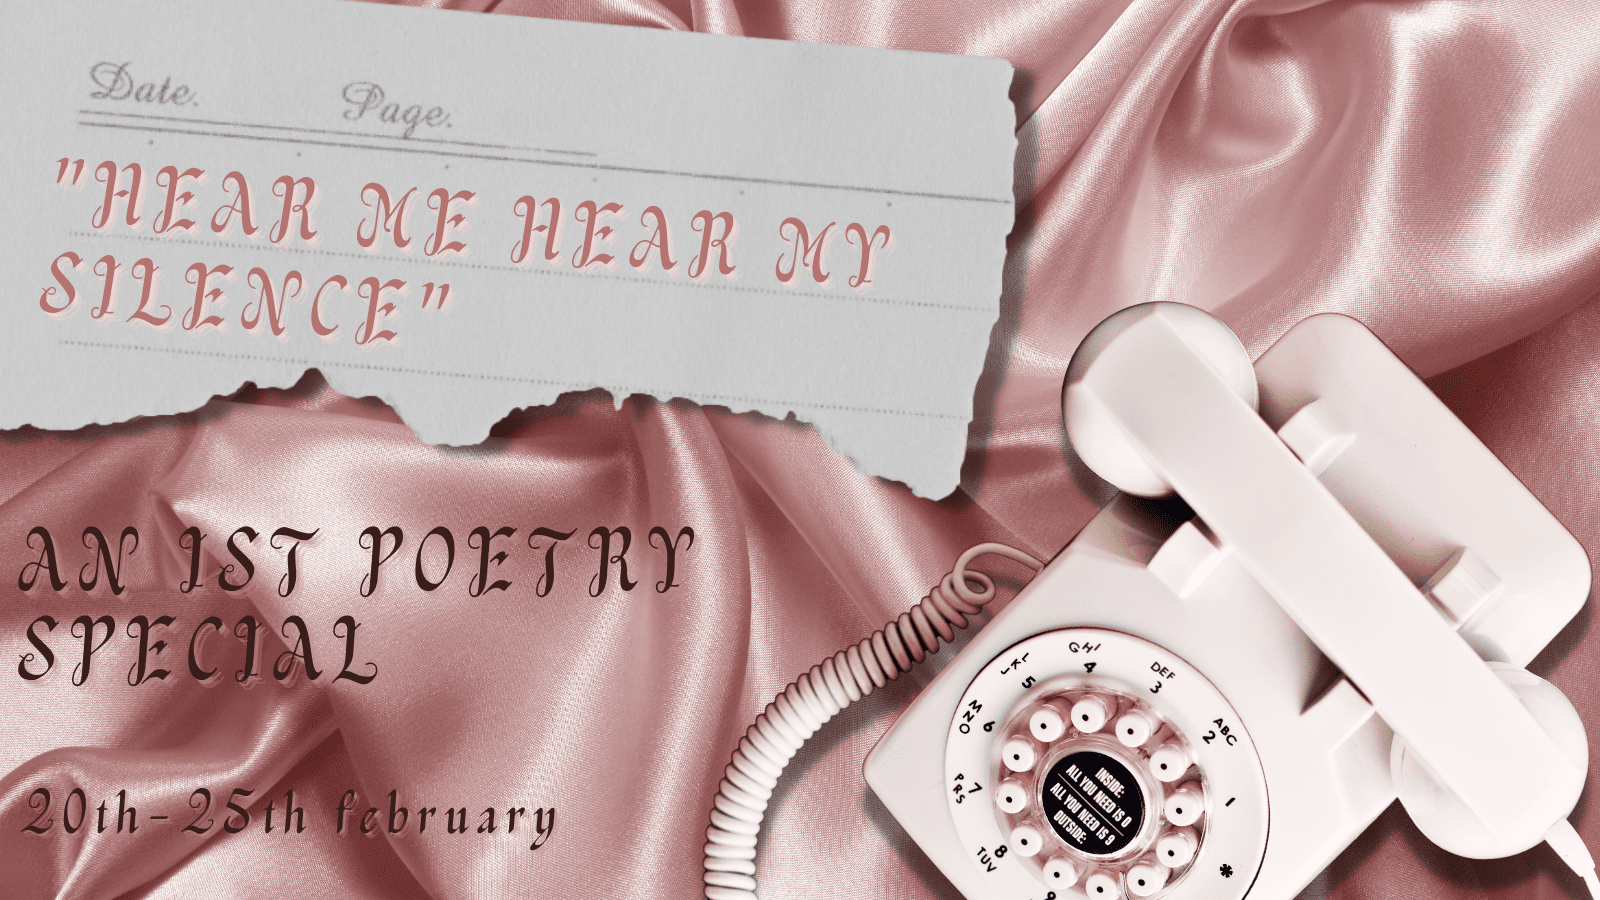 Text on a diary page saying "hear me, hear my silence", an IST poetry special, 20th to the 25th February